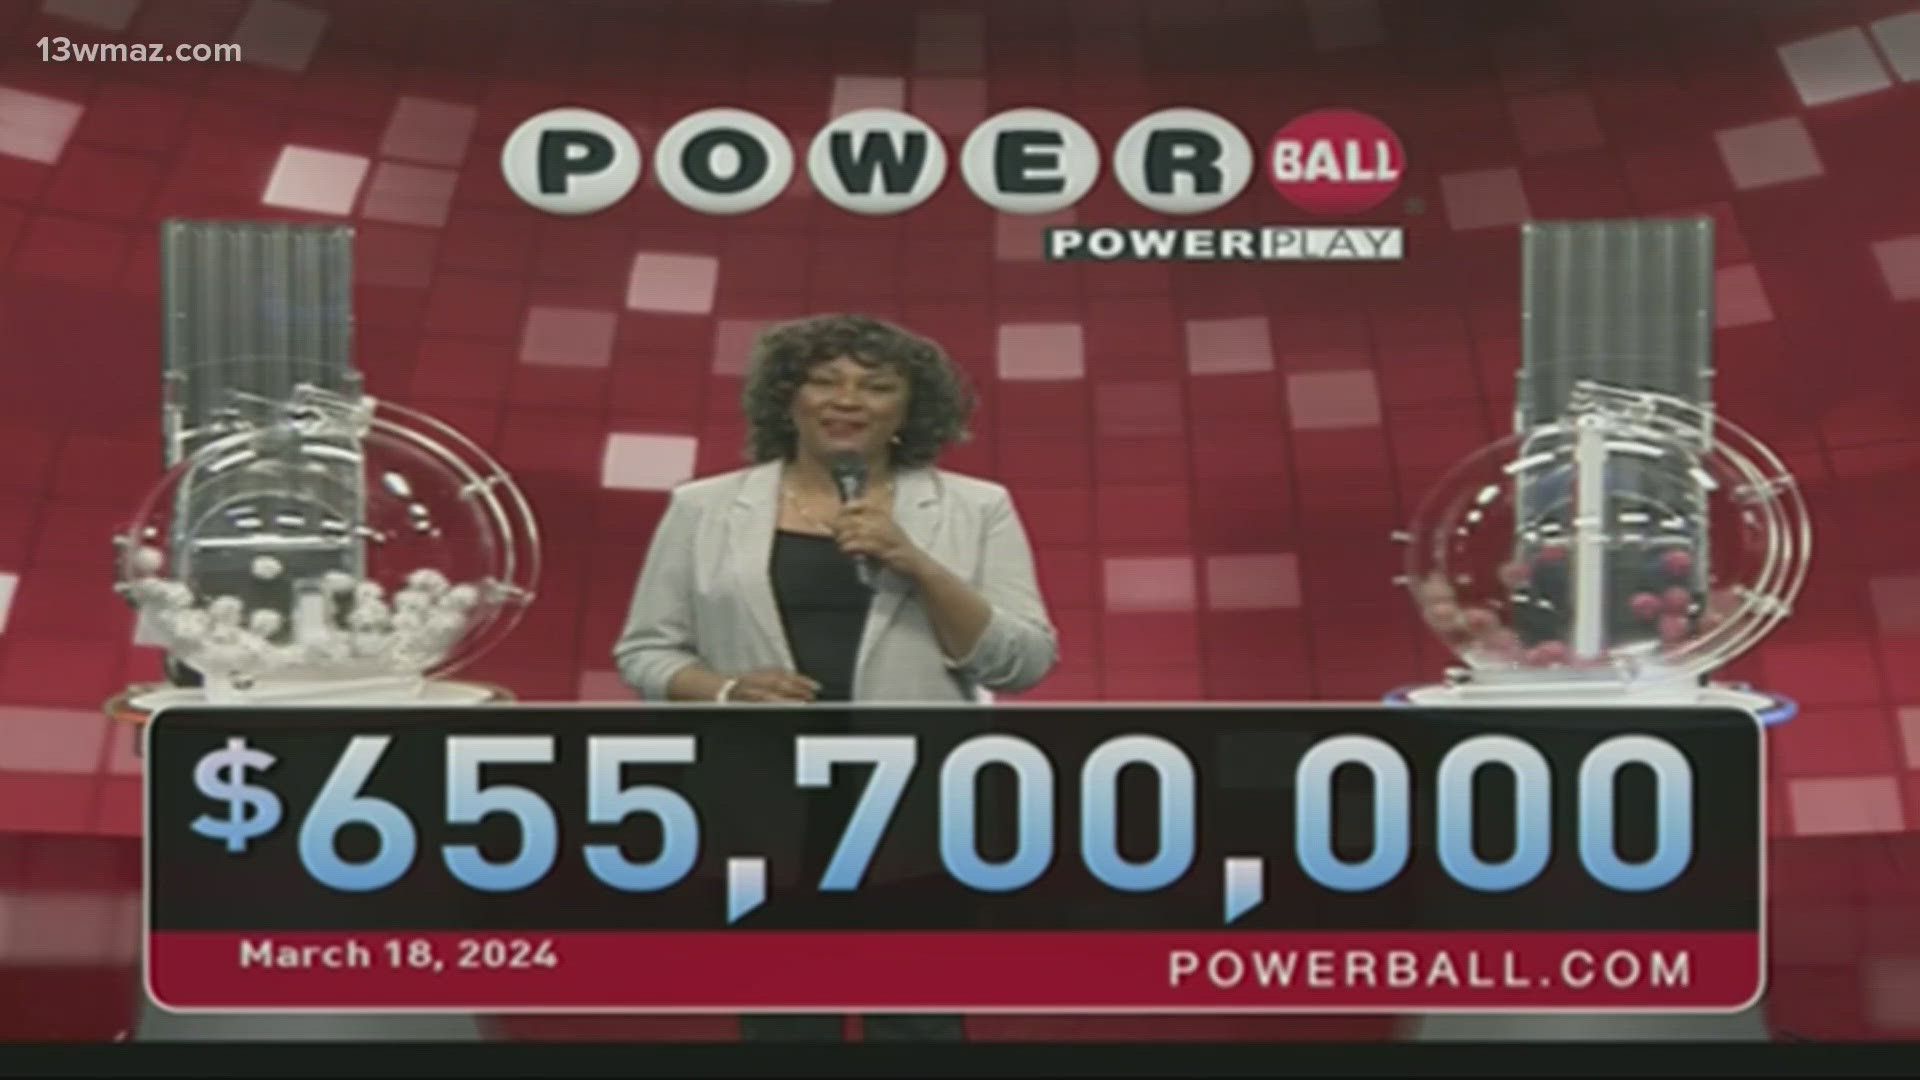 Here are your winning Powerball Numbers for March 18, 2024's $655.7 million jackpot. What would you do with that kind of cash?